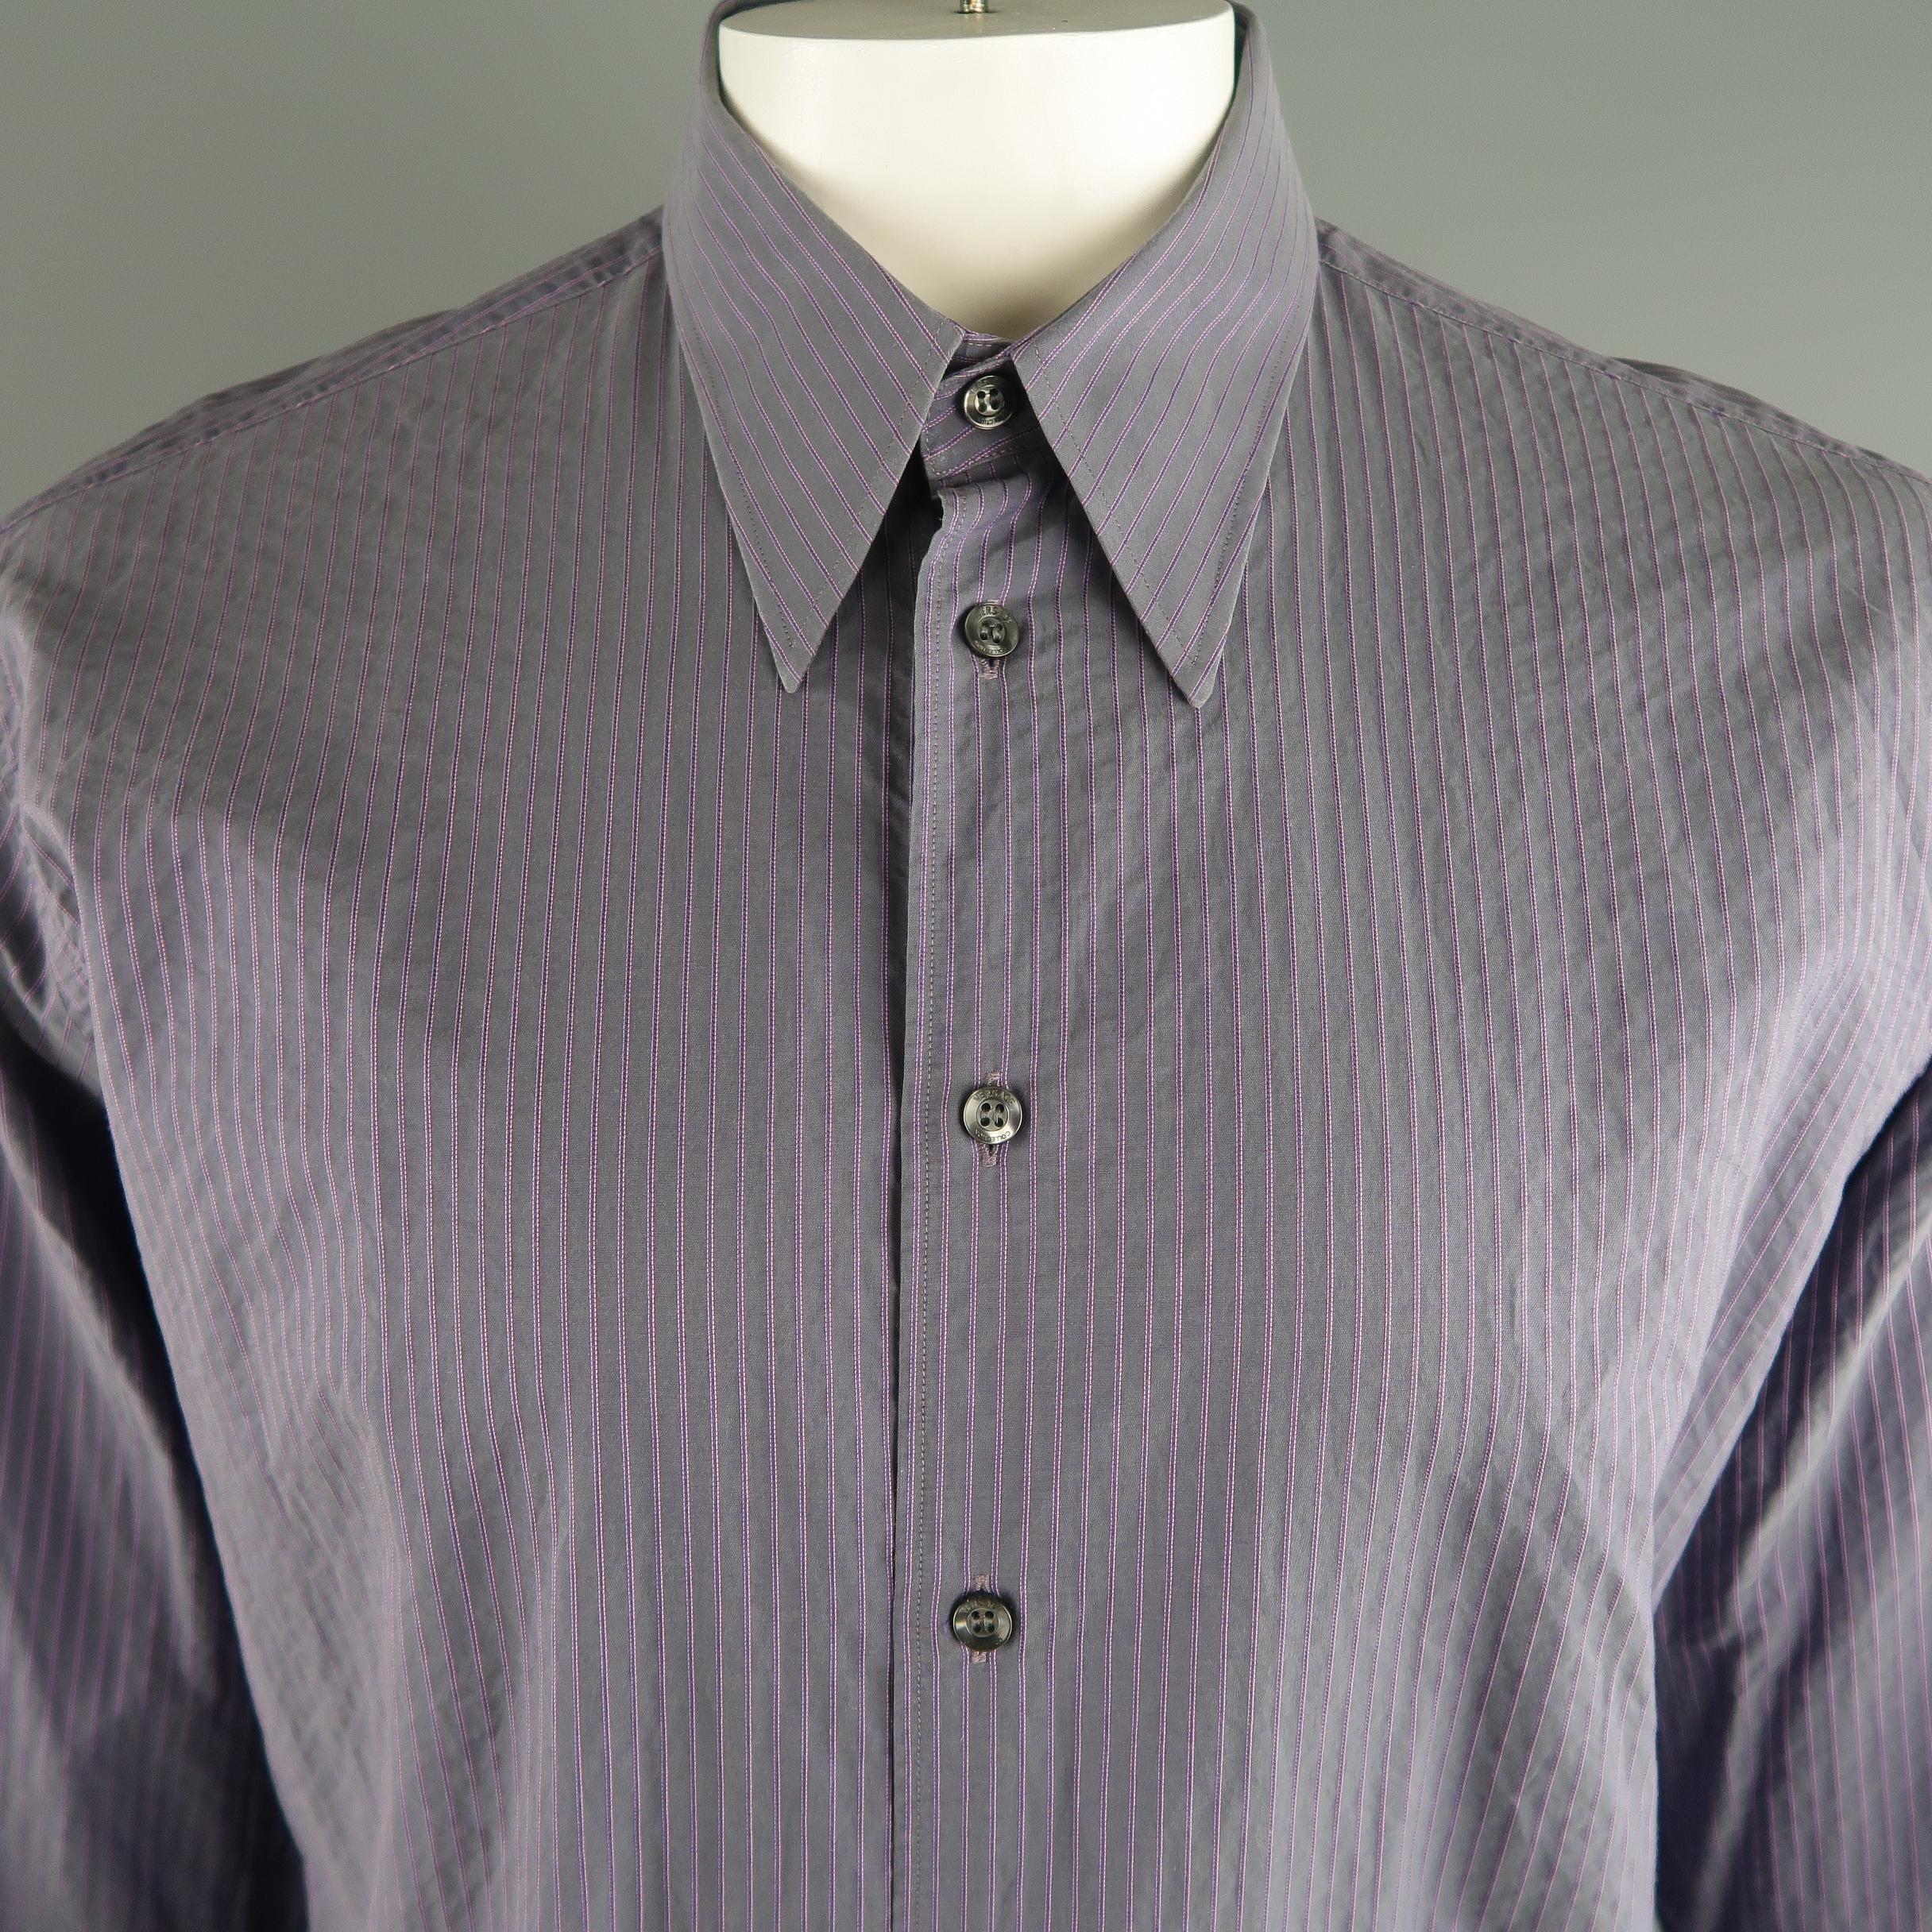 VERSACE COLLECTION fitted long sleeve shirt comes in lavender tone in a striped cotton material, button up. Minor wear.
 
Excellent Pre-Owned Condition.
Marked: 17/43
 
Measurements:
 
Shoulder: 19  in.
Chest: 49  in.
Sleeve: 27.5  in.
Length:  32 